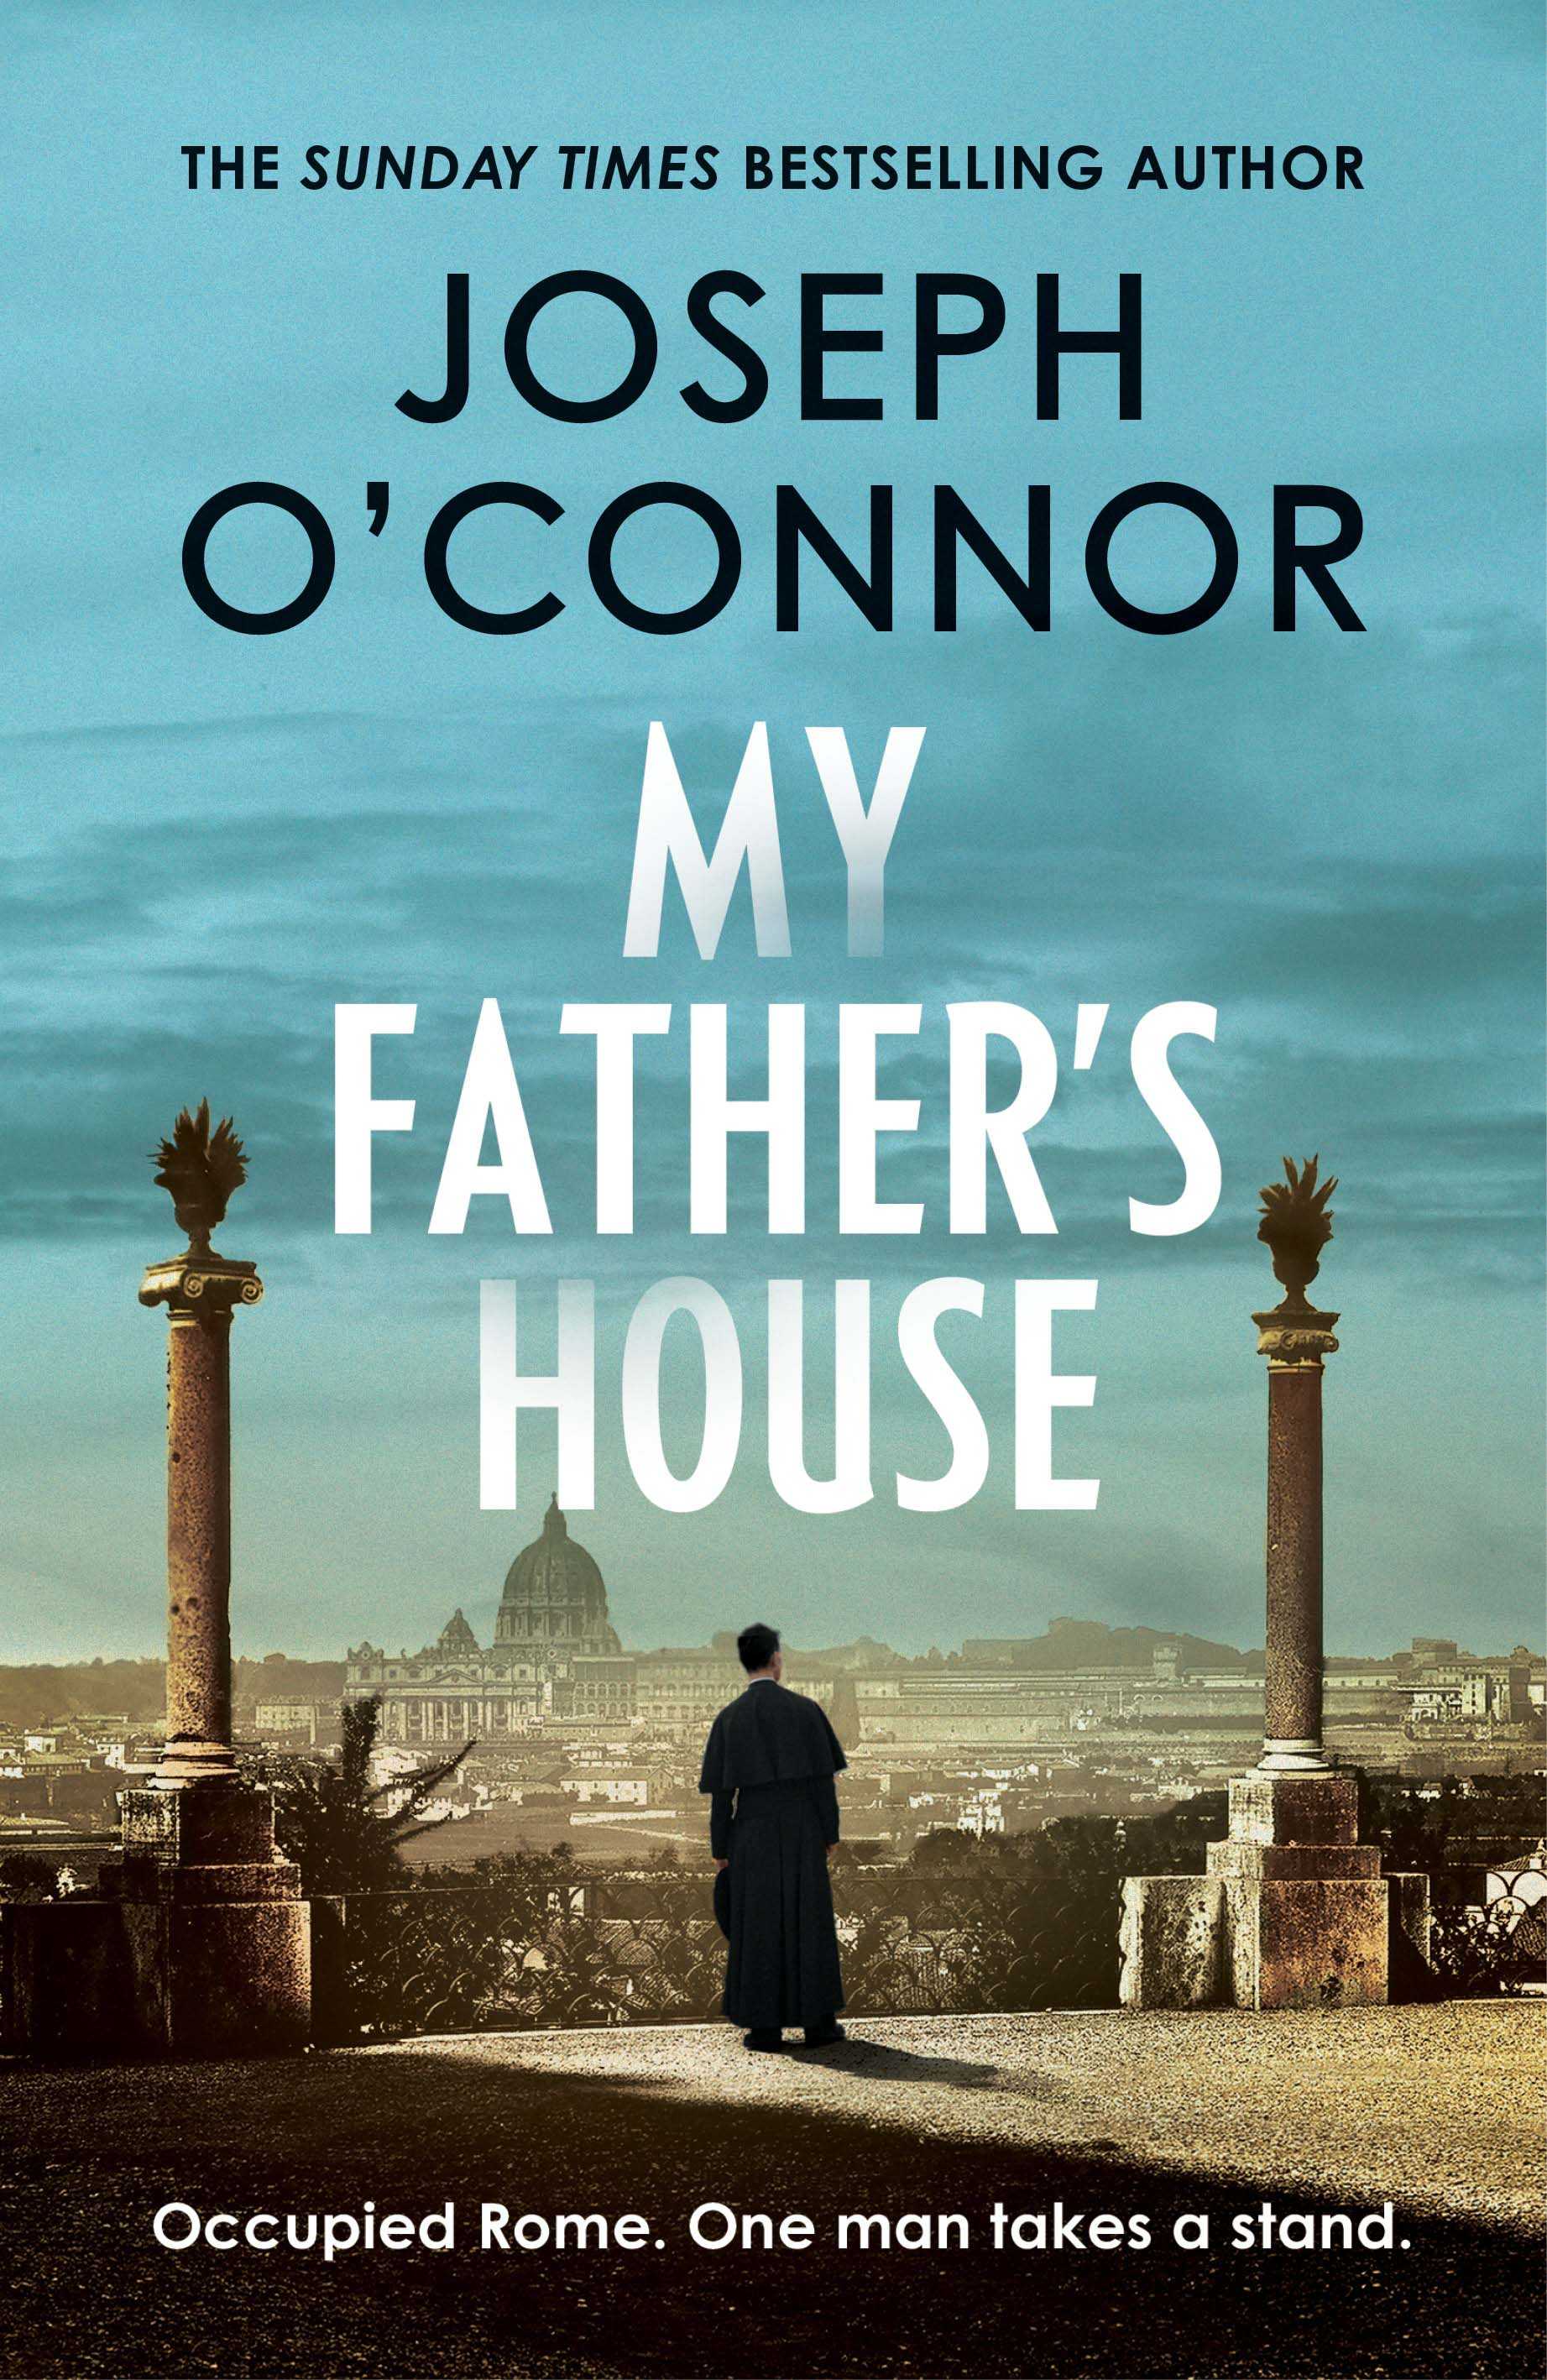 My Father's House by Joseph O'Connor